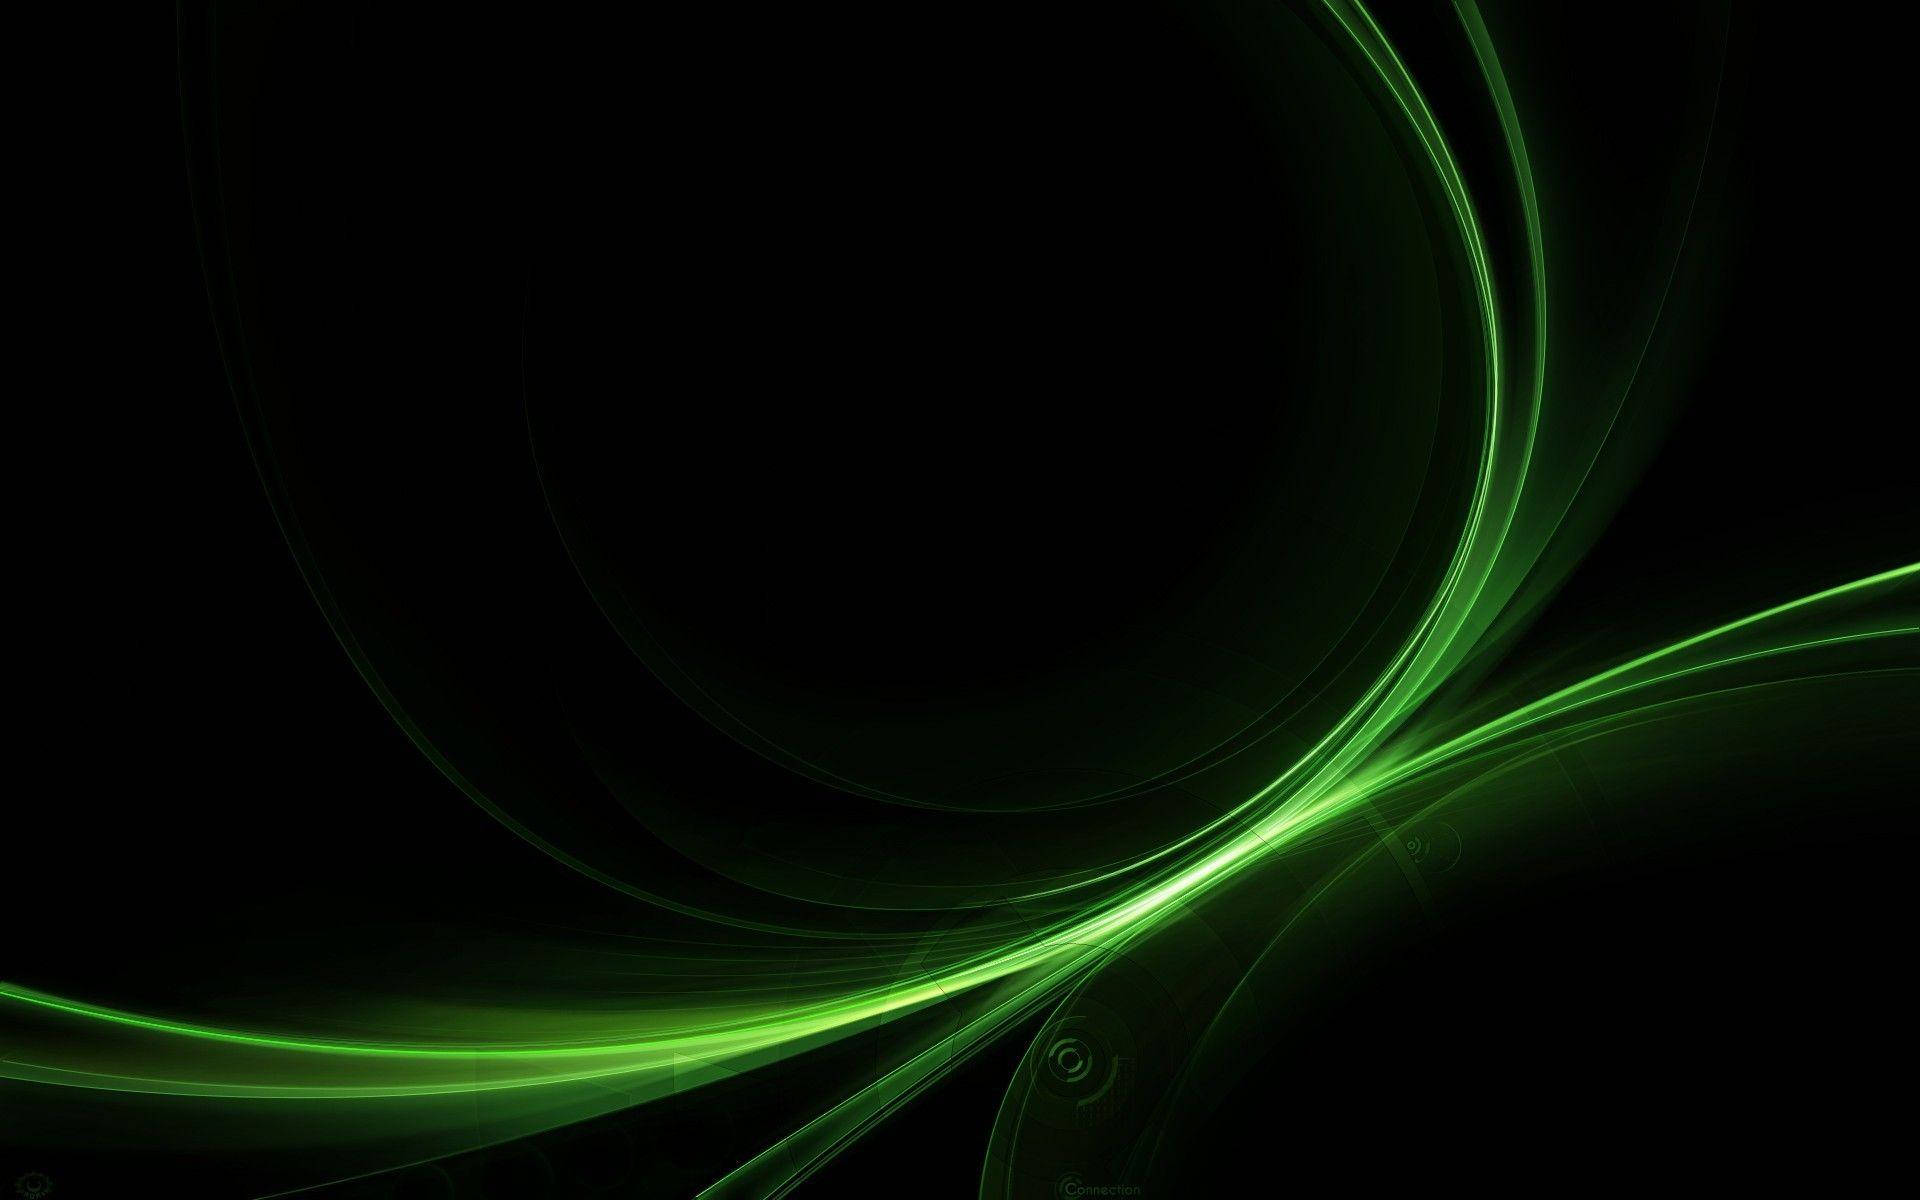 Intertwining Green Rays Abstract Wallpaper